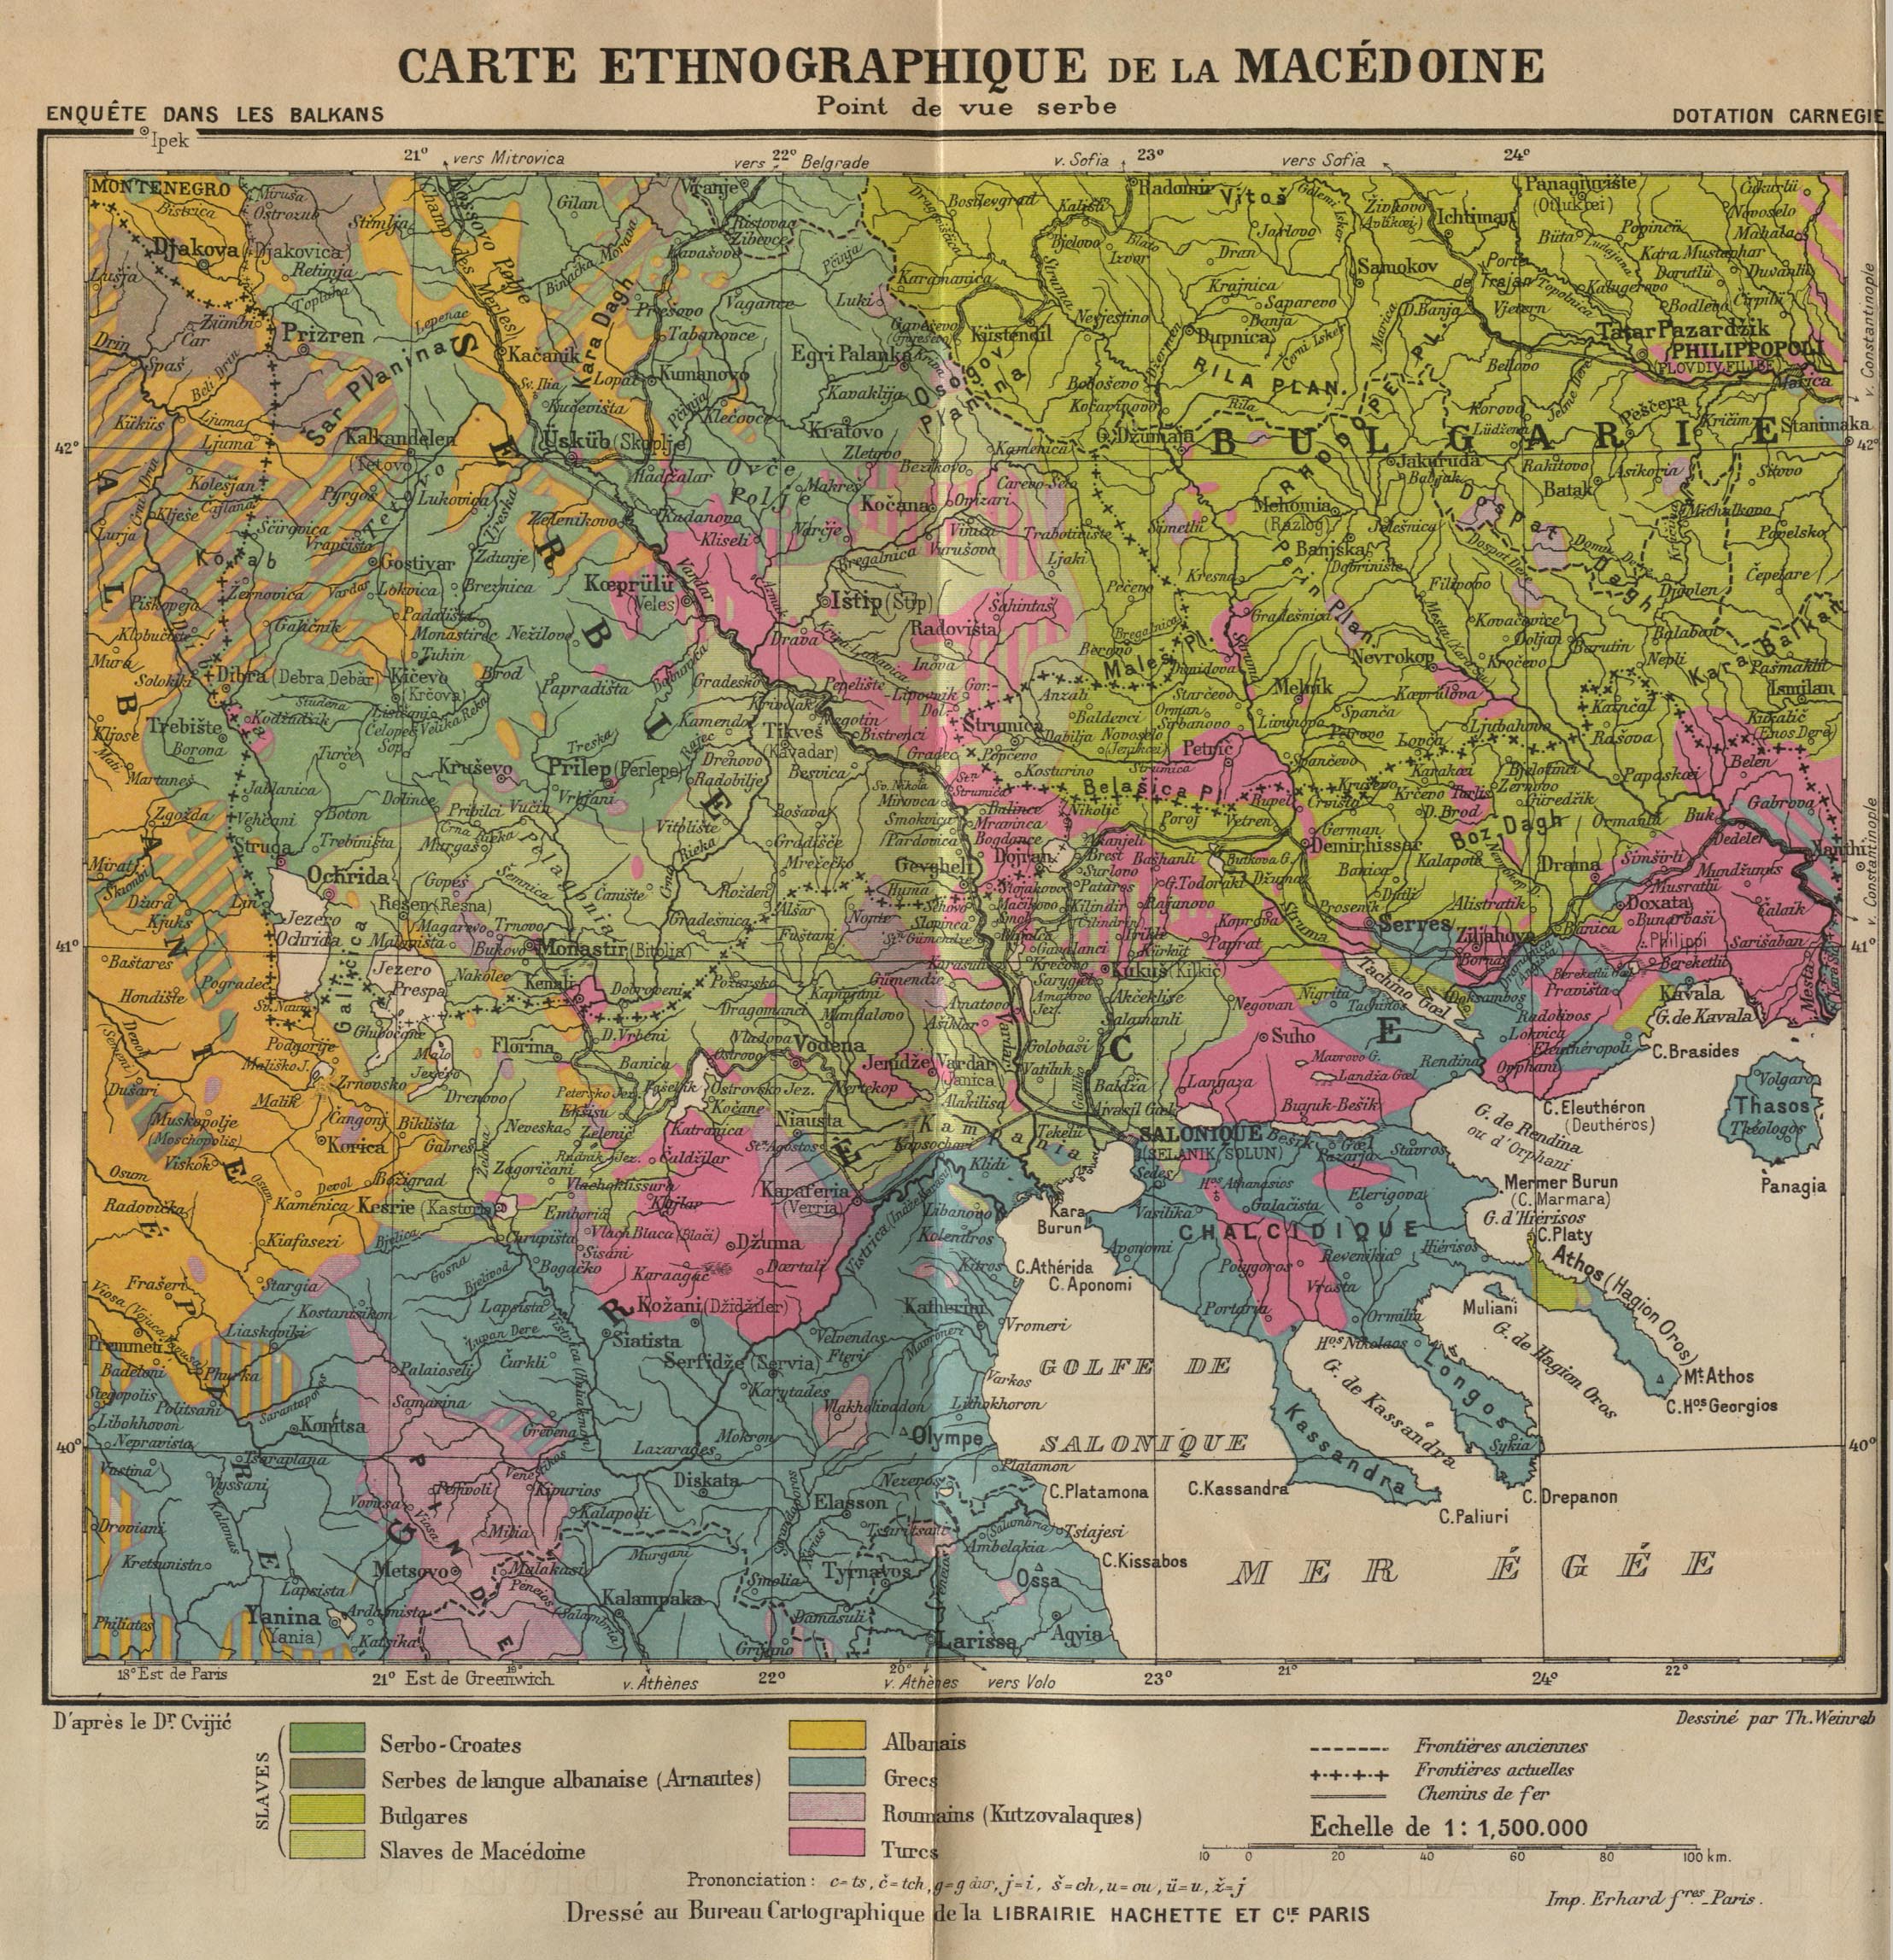 Map of Macedonia from the point of view of the Serbs 1914